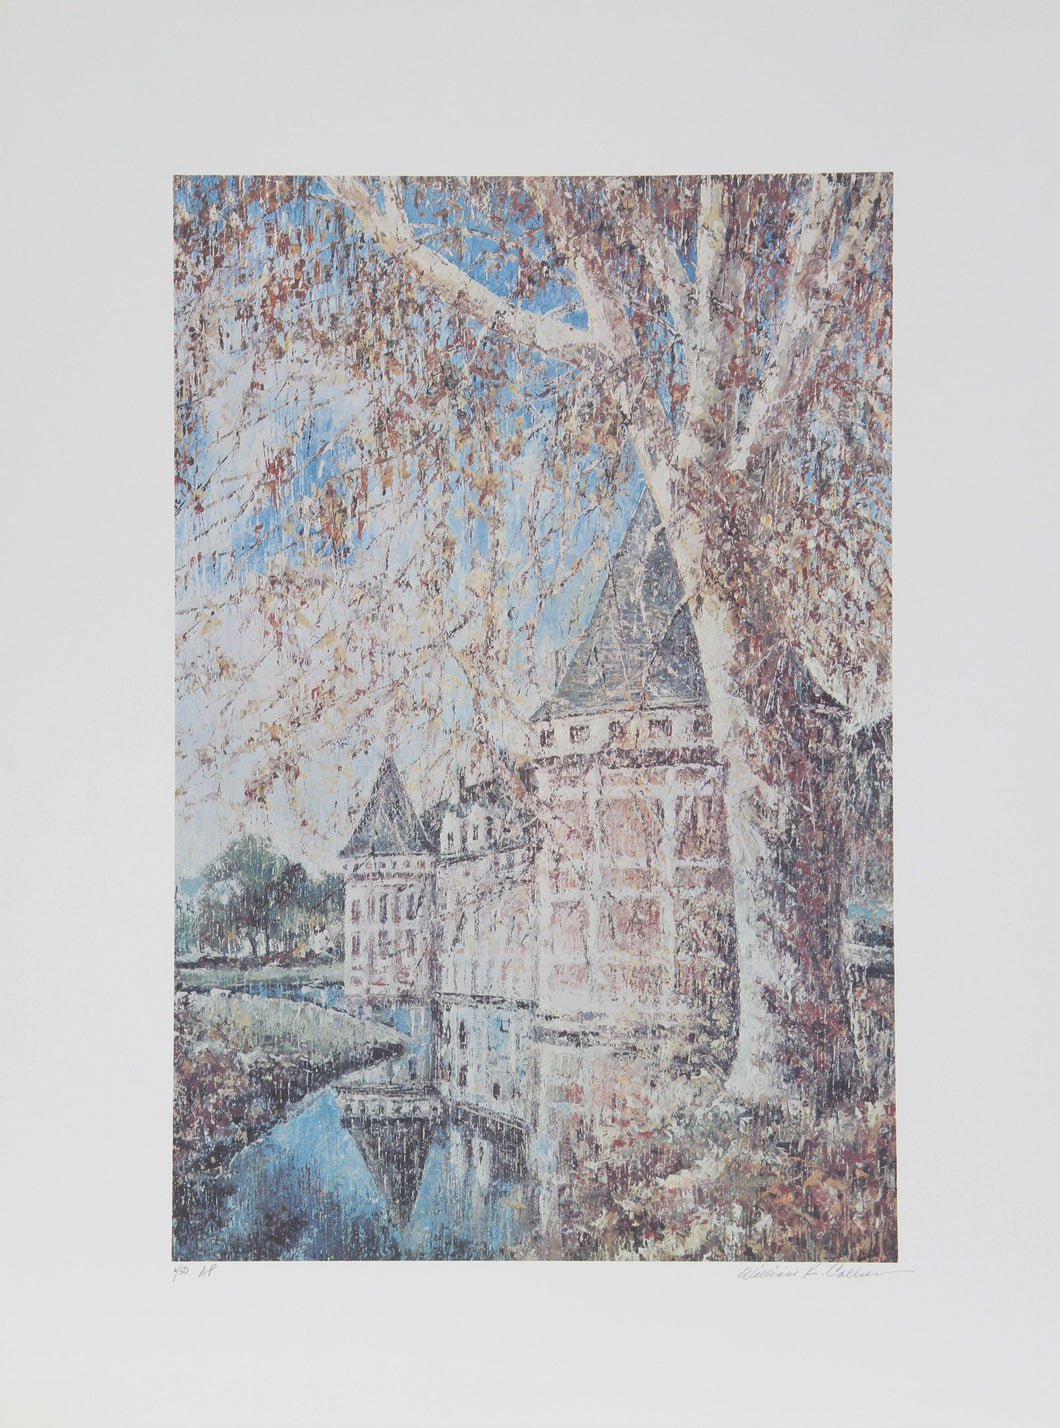 French Castle Lithograph | William Collier,{{product.type}}